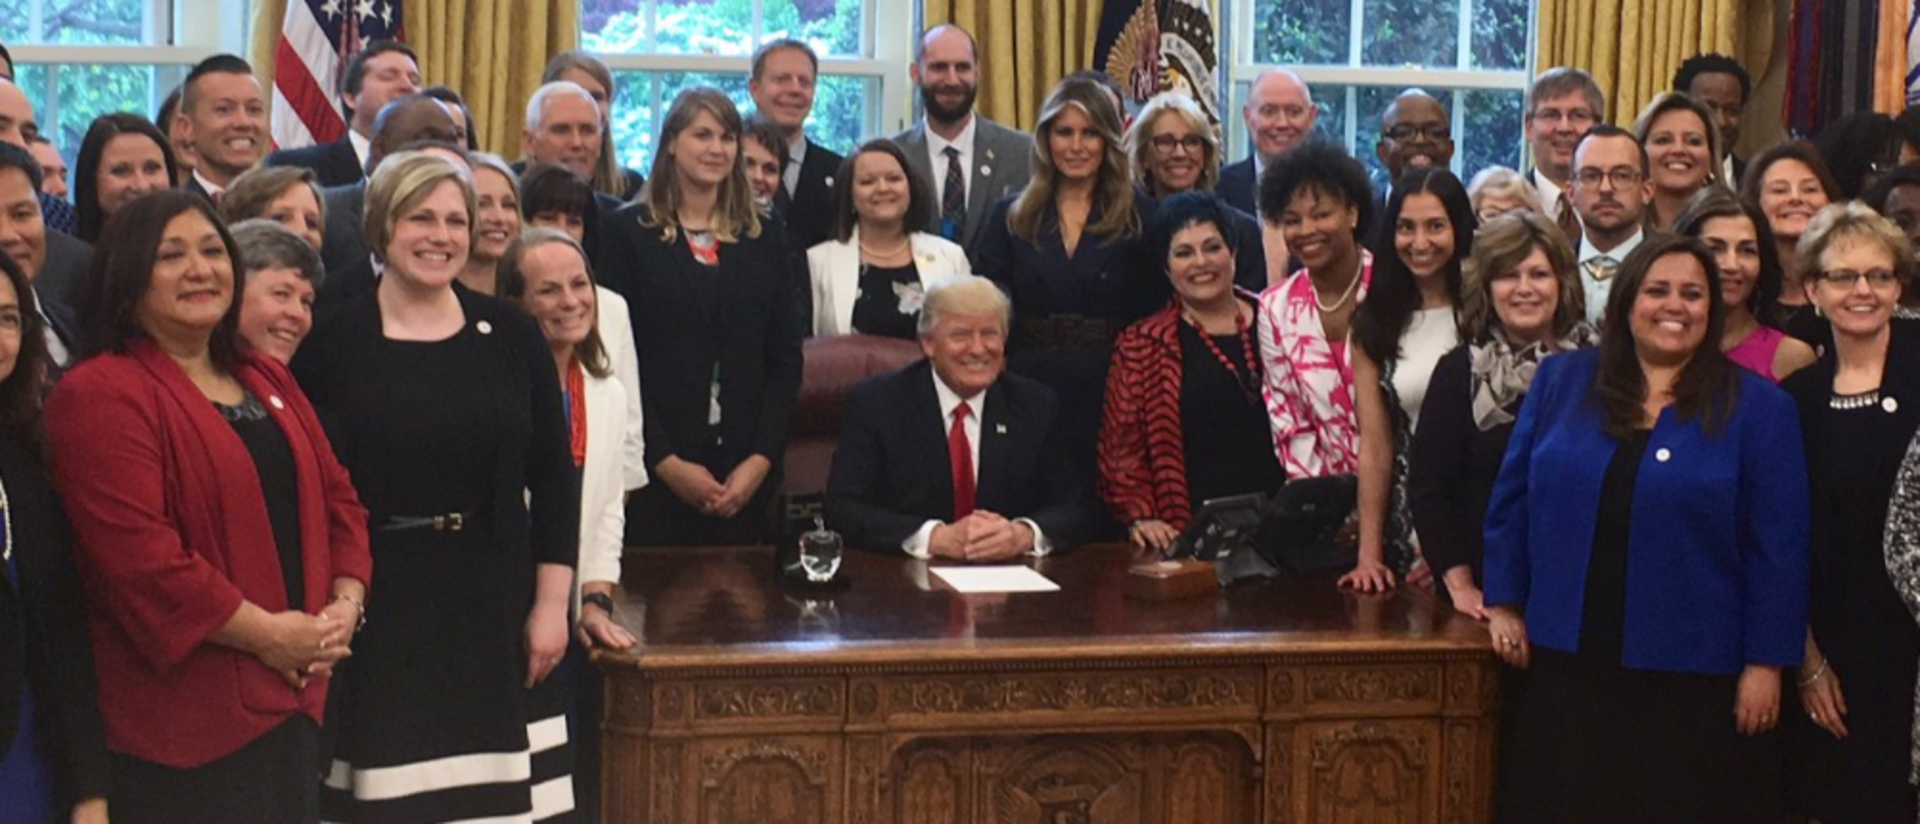 Chris Gleason and other state Teacher of the Year winners in the Oval Office.